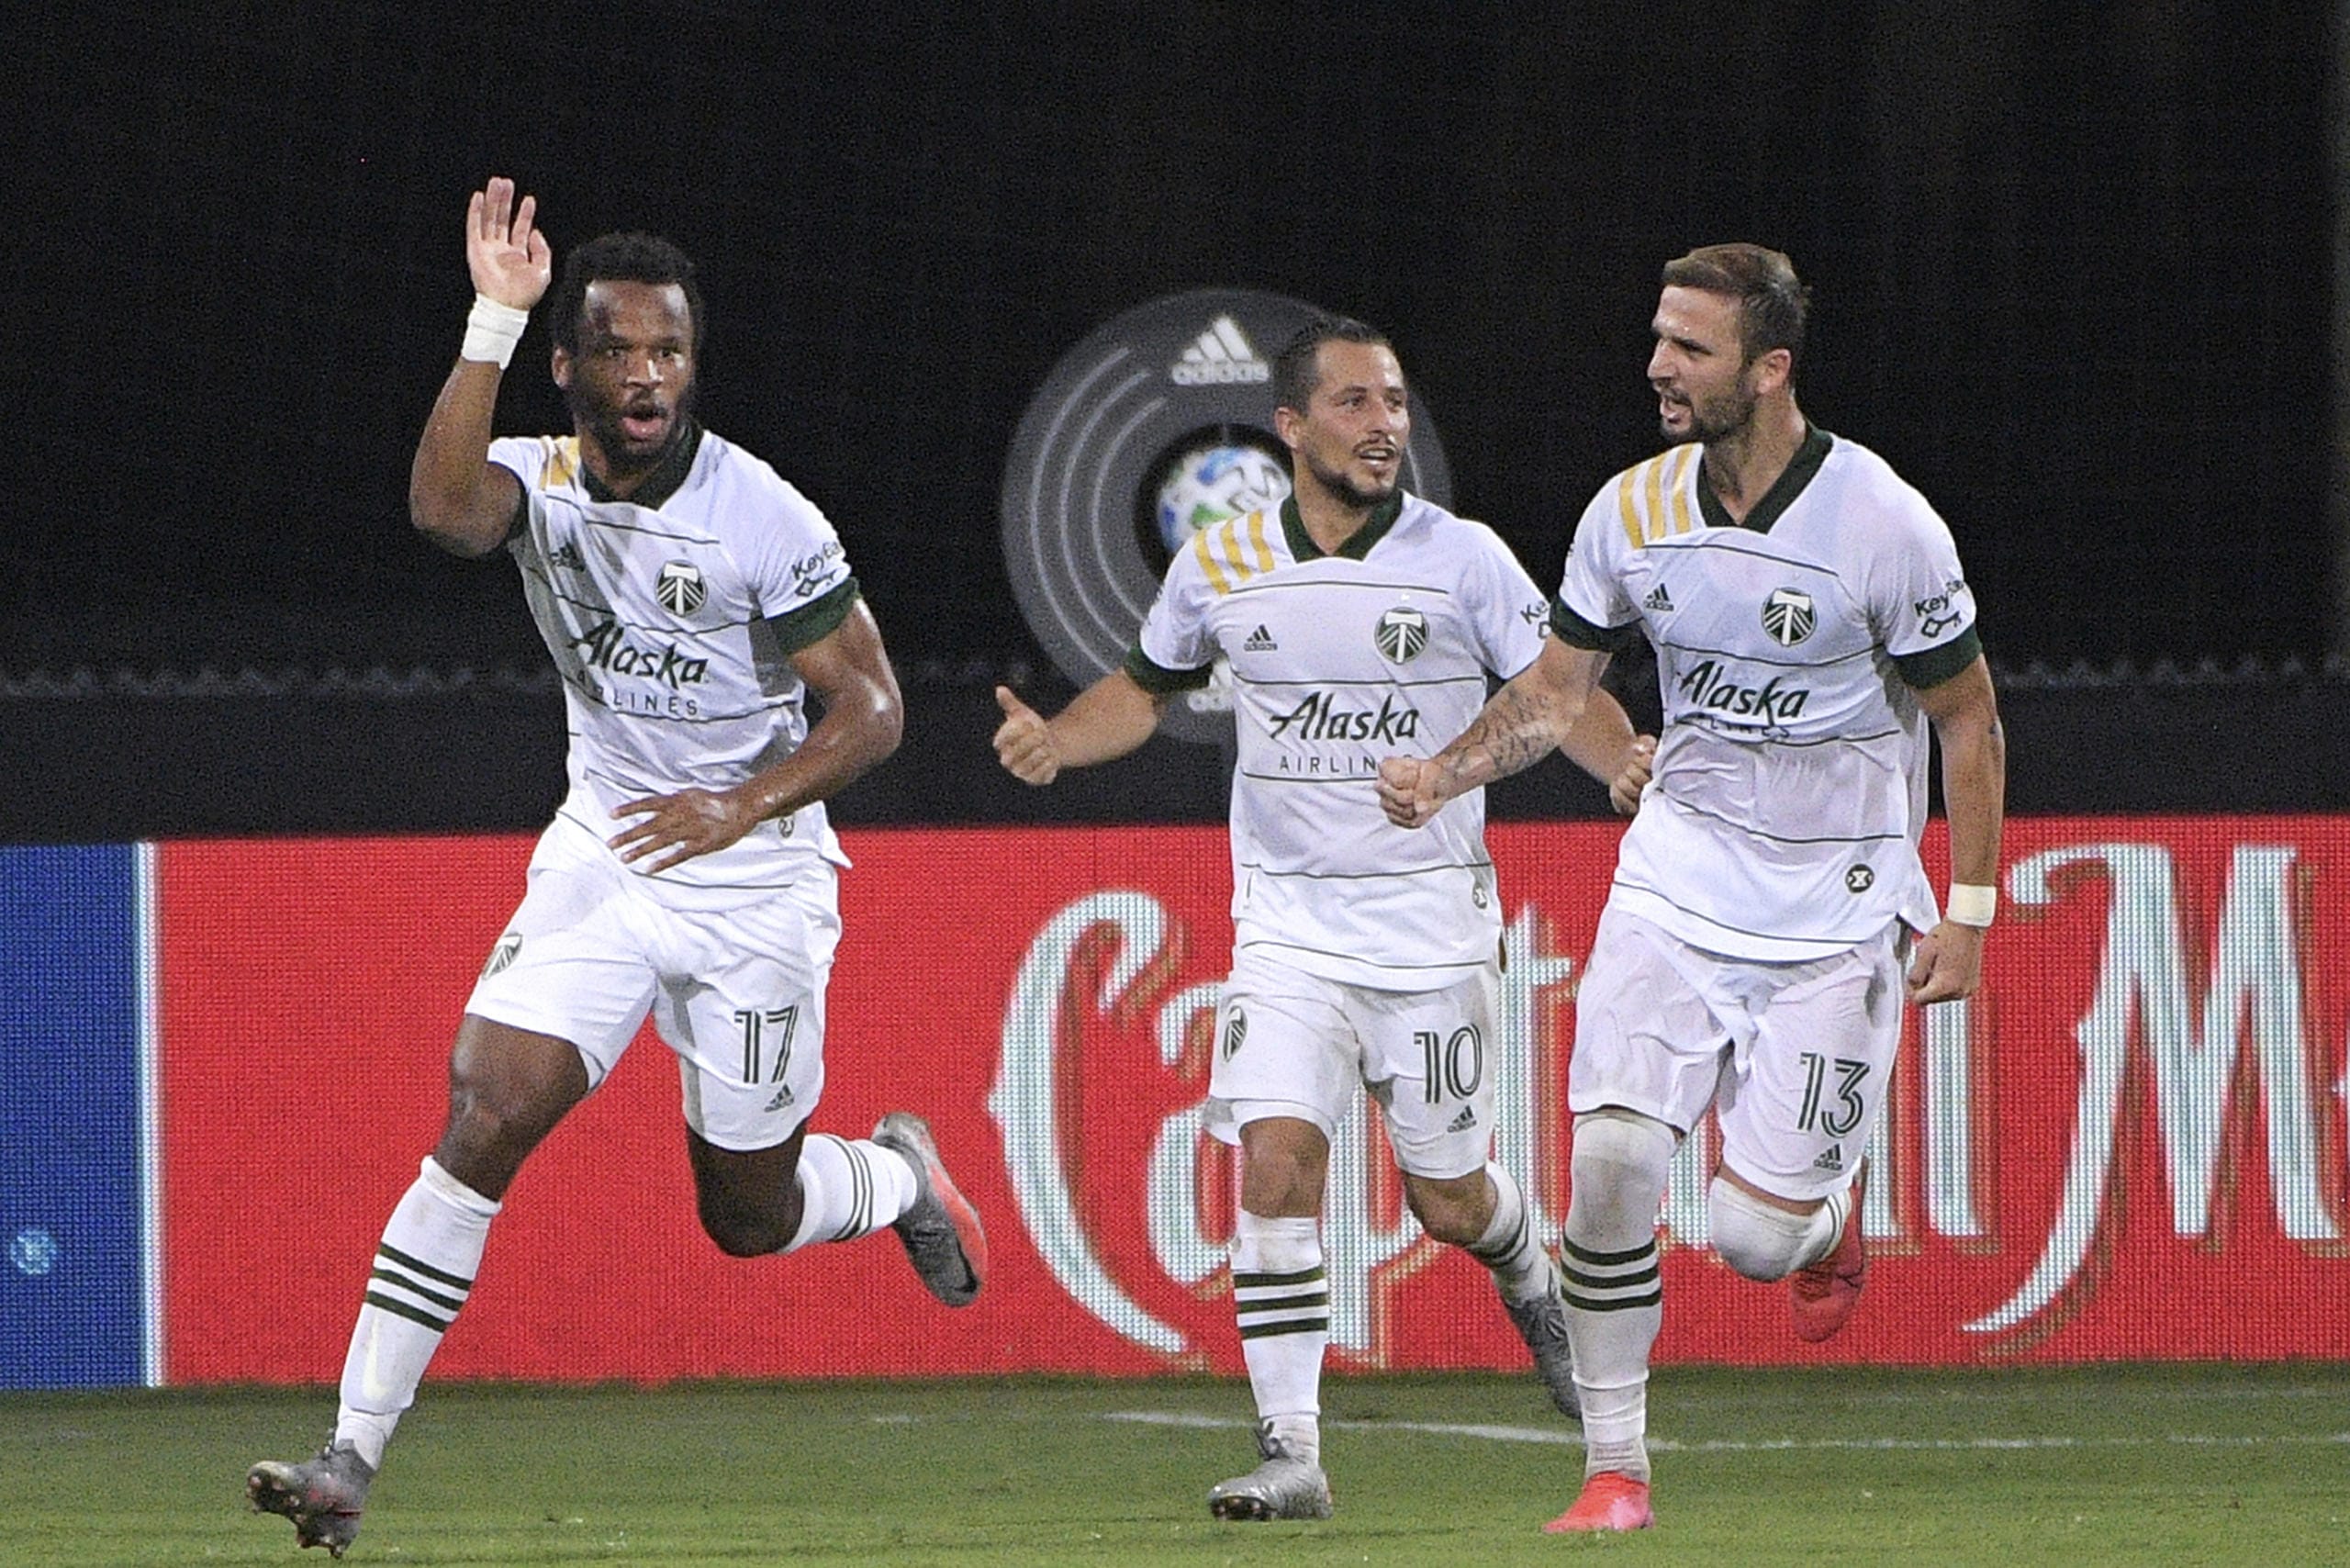 Portland Timbers forward Jeremy Ebobisse (17) celebrates after scoring a goal as midfielder Sebastian Blanco (10) and defender Dario Zuparic (13) come to congratulate him during the second half of an MLS soccer match against the Los Angeles FC, early Friday, July 24, 2020, in Kissimmee, Fla. (AP Photo/Phelan M.